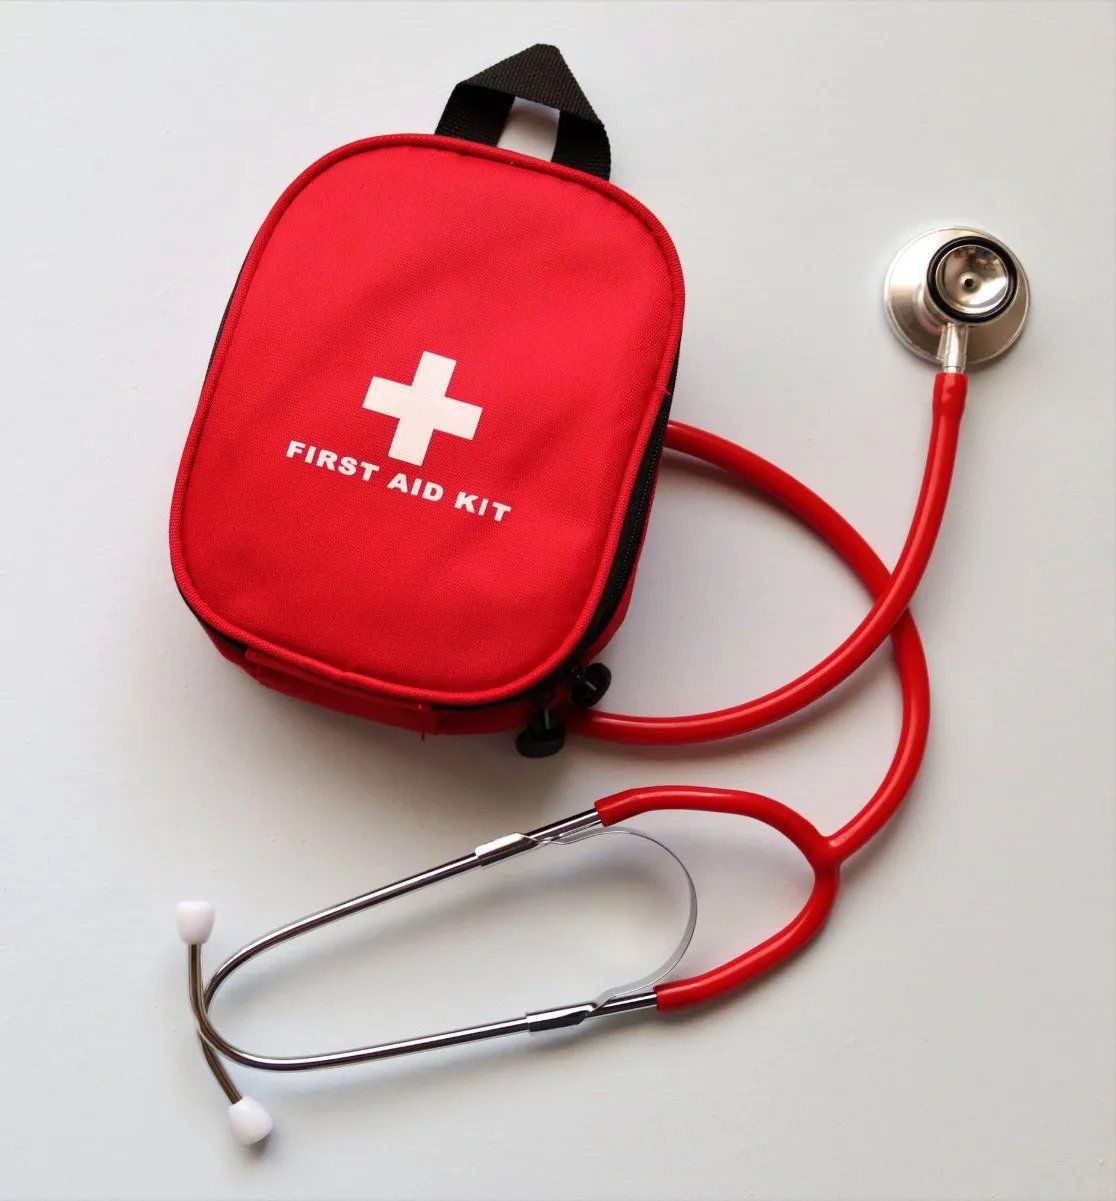 First Aid Kit With Stethoscope — First Aid Industrial Medical In Taree, NSW